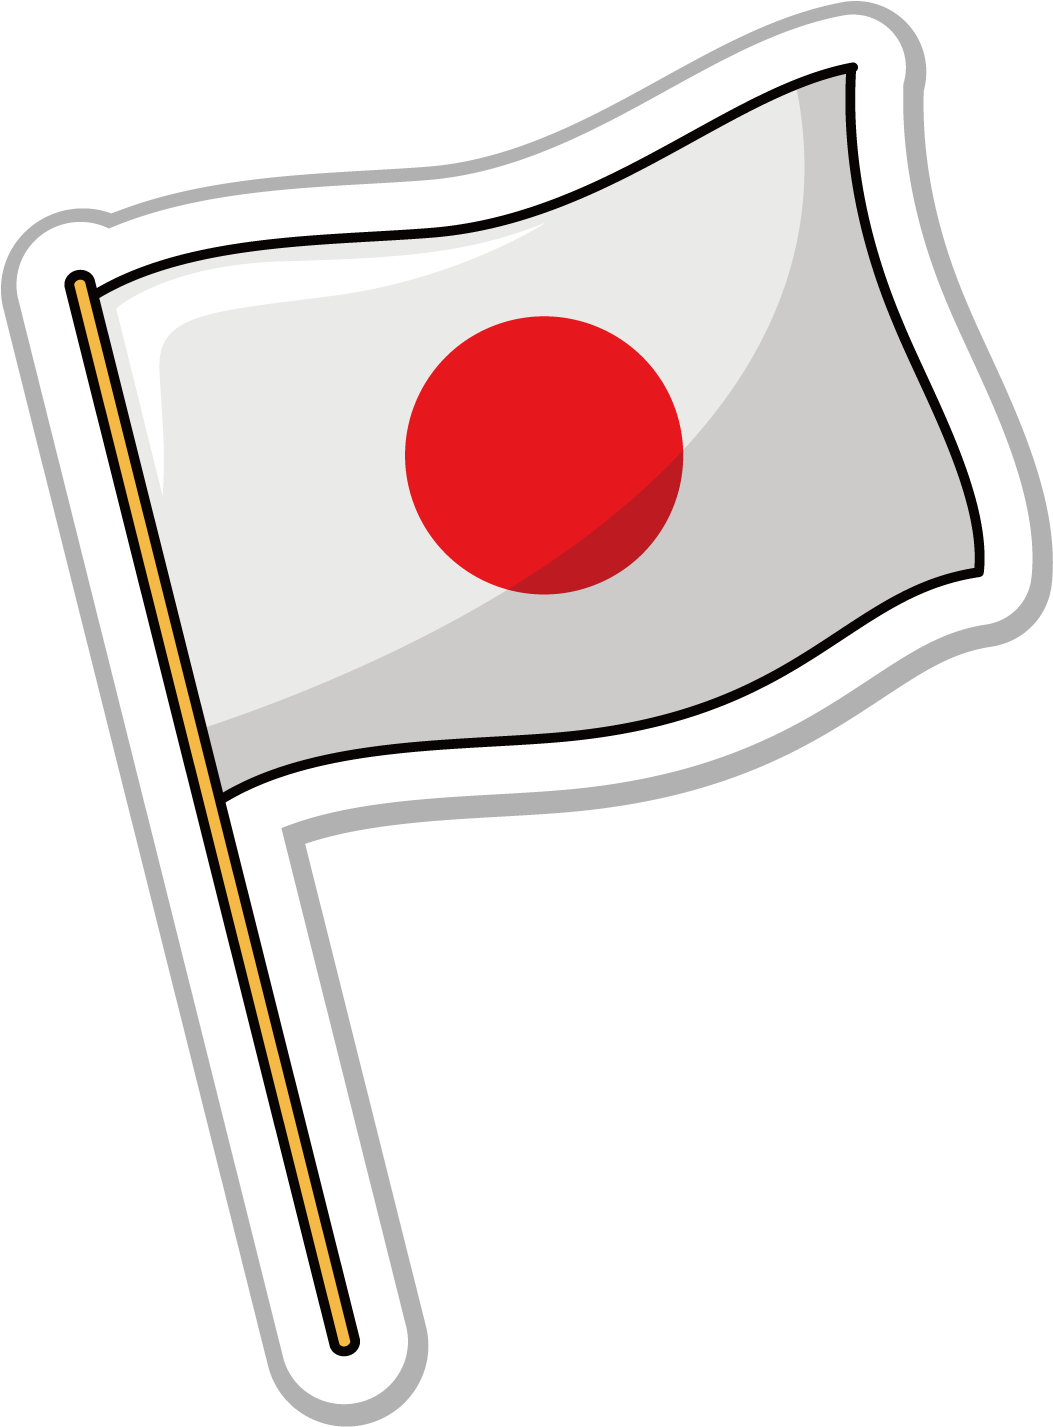 Flag Of Japan Flag Of The United States - Japan Flag Png (1404x1511)